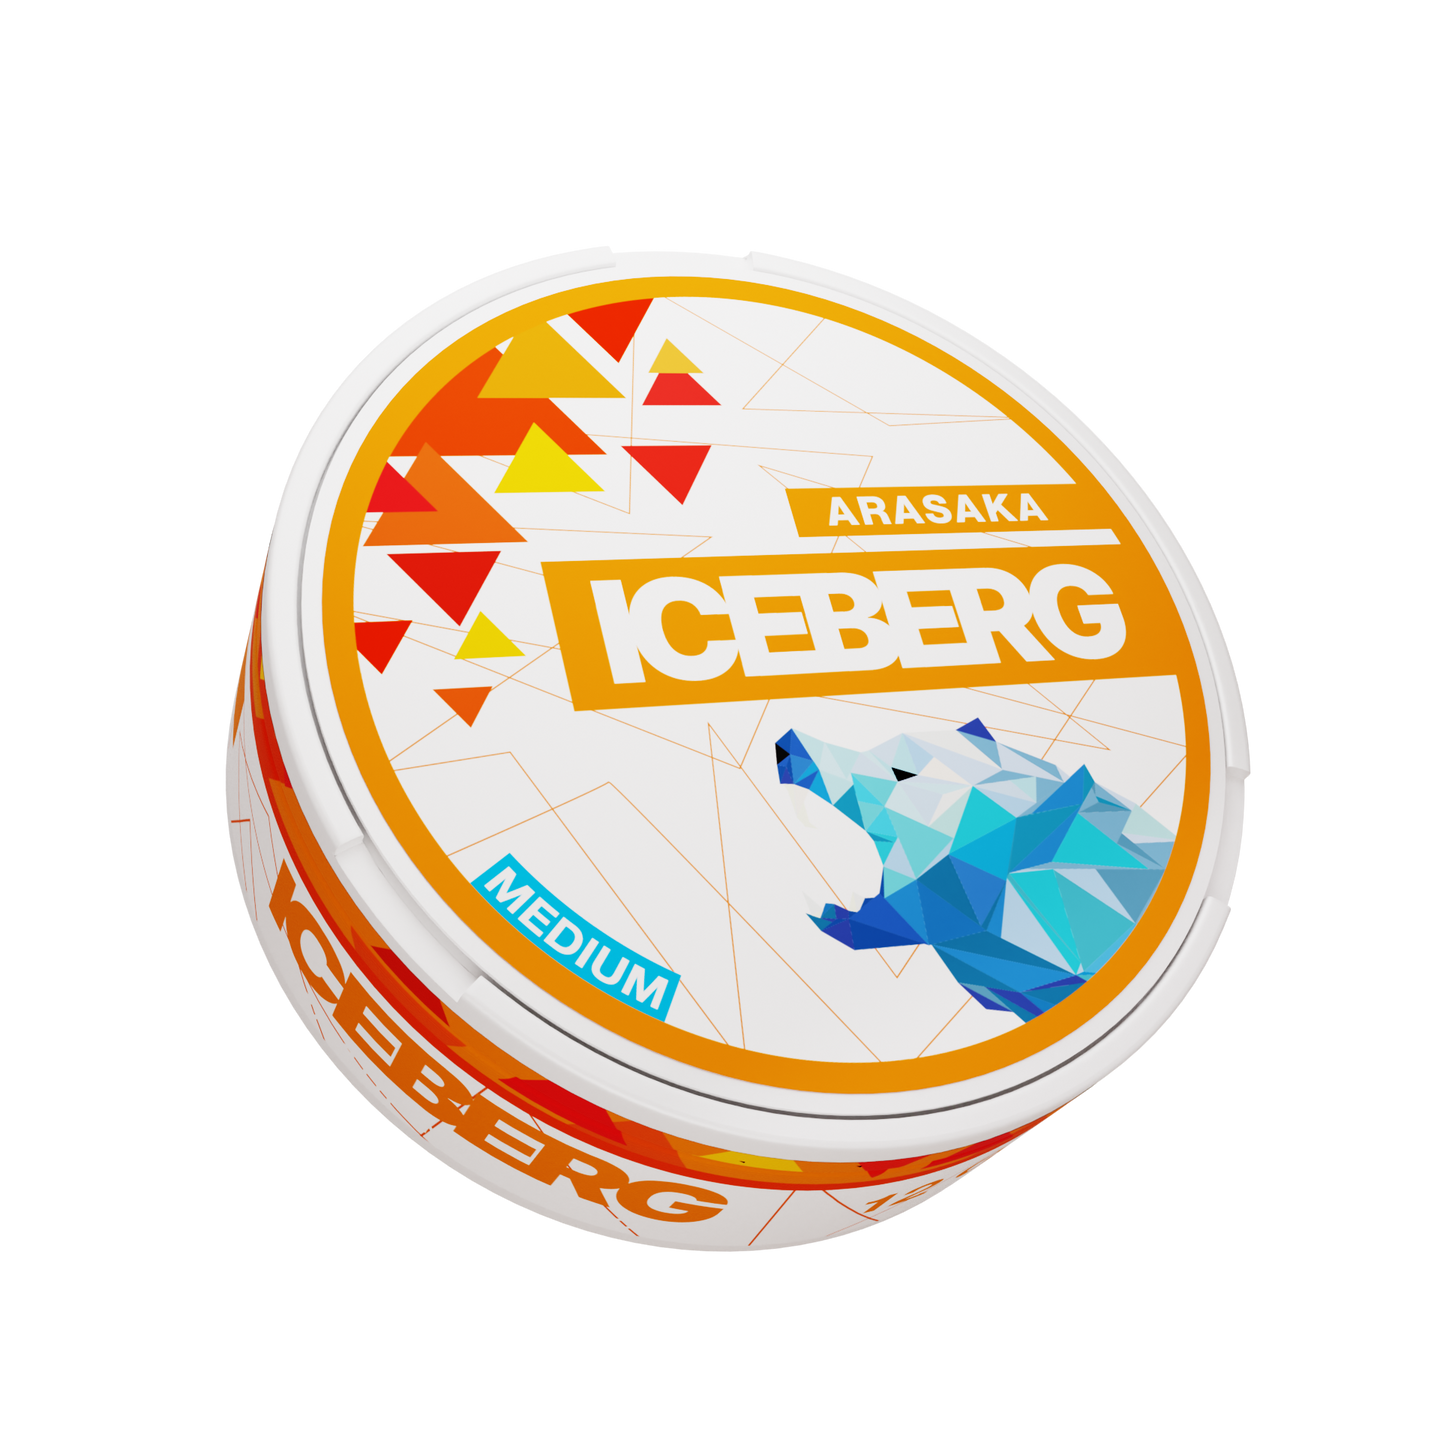 Buy Iceberg Arasaka 20 | Low Prices And Fast Delivery